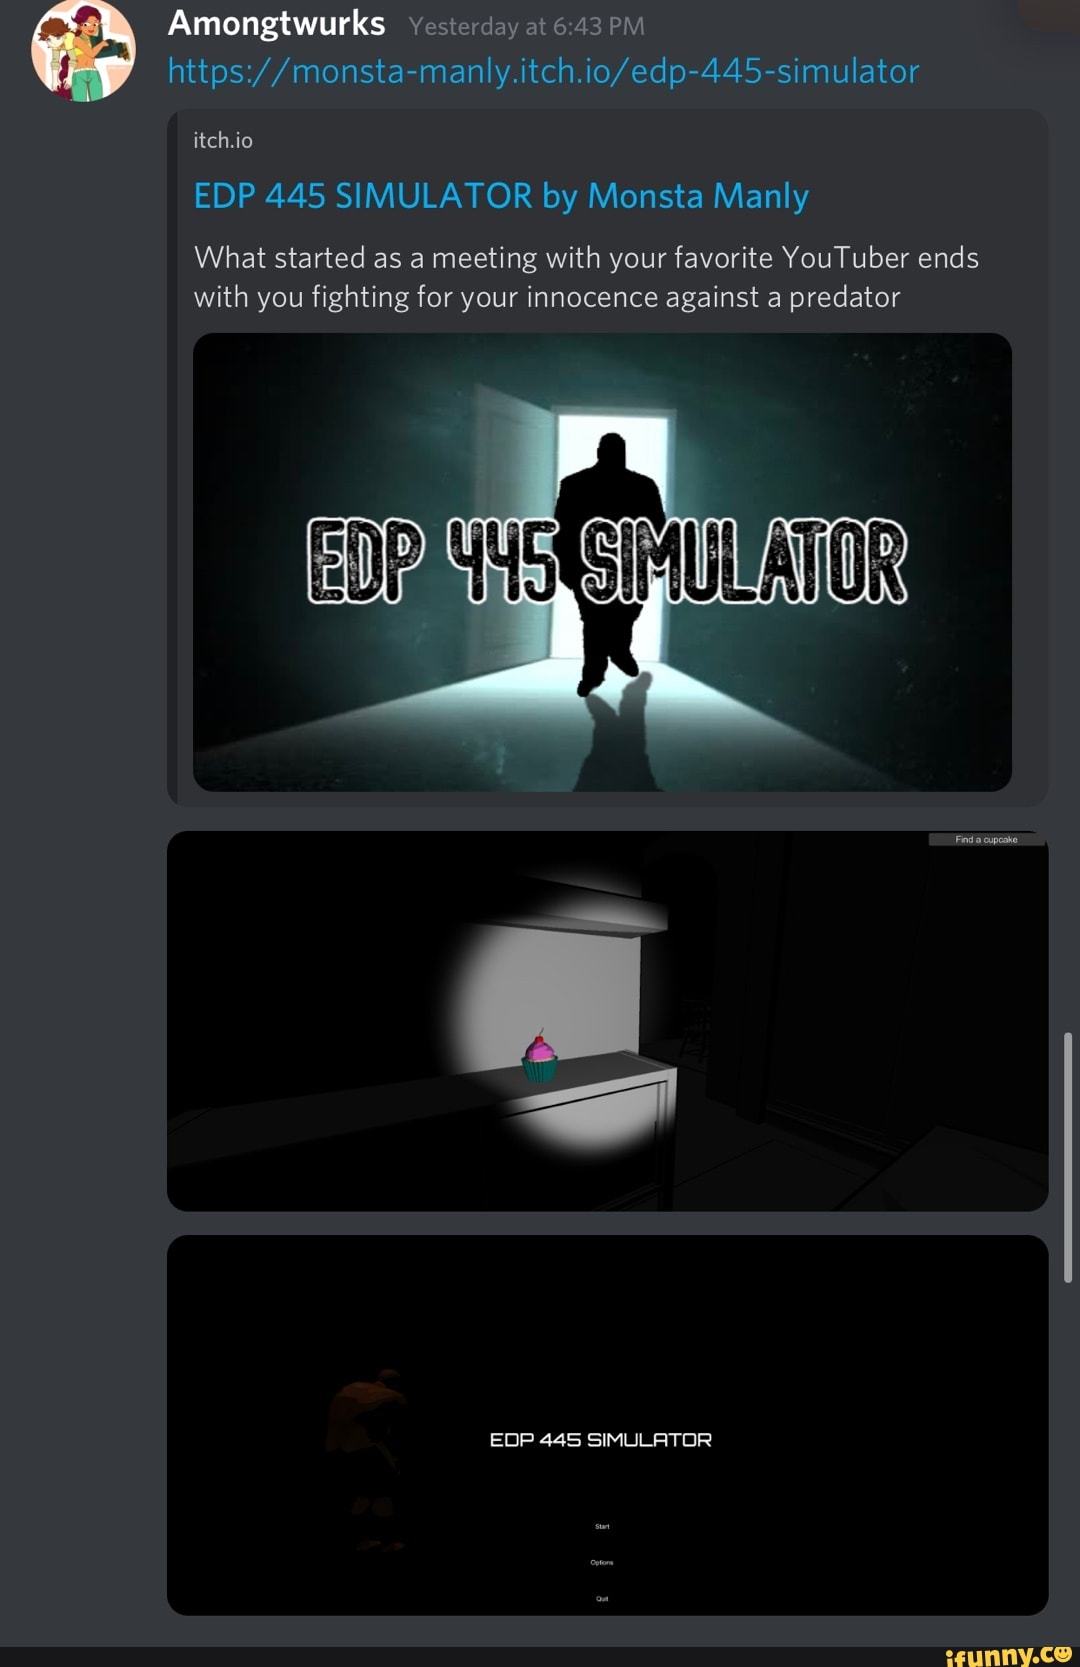 EDP 445 SIMULATOR by Monsta Manly